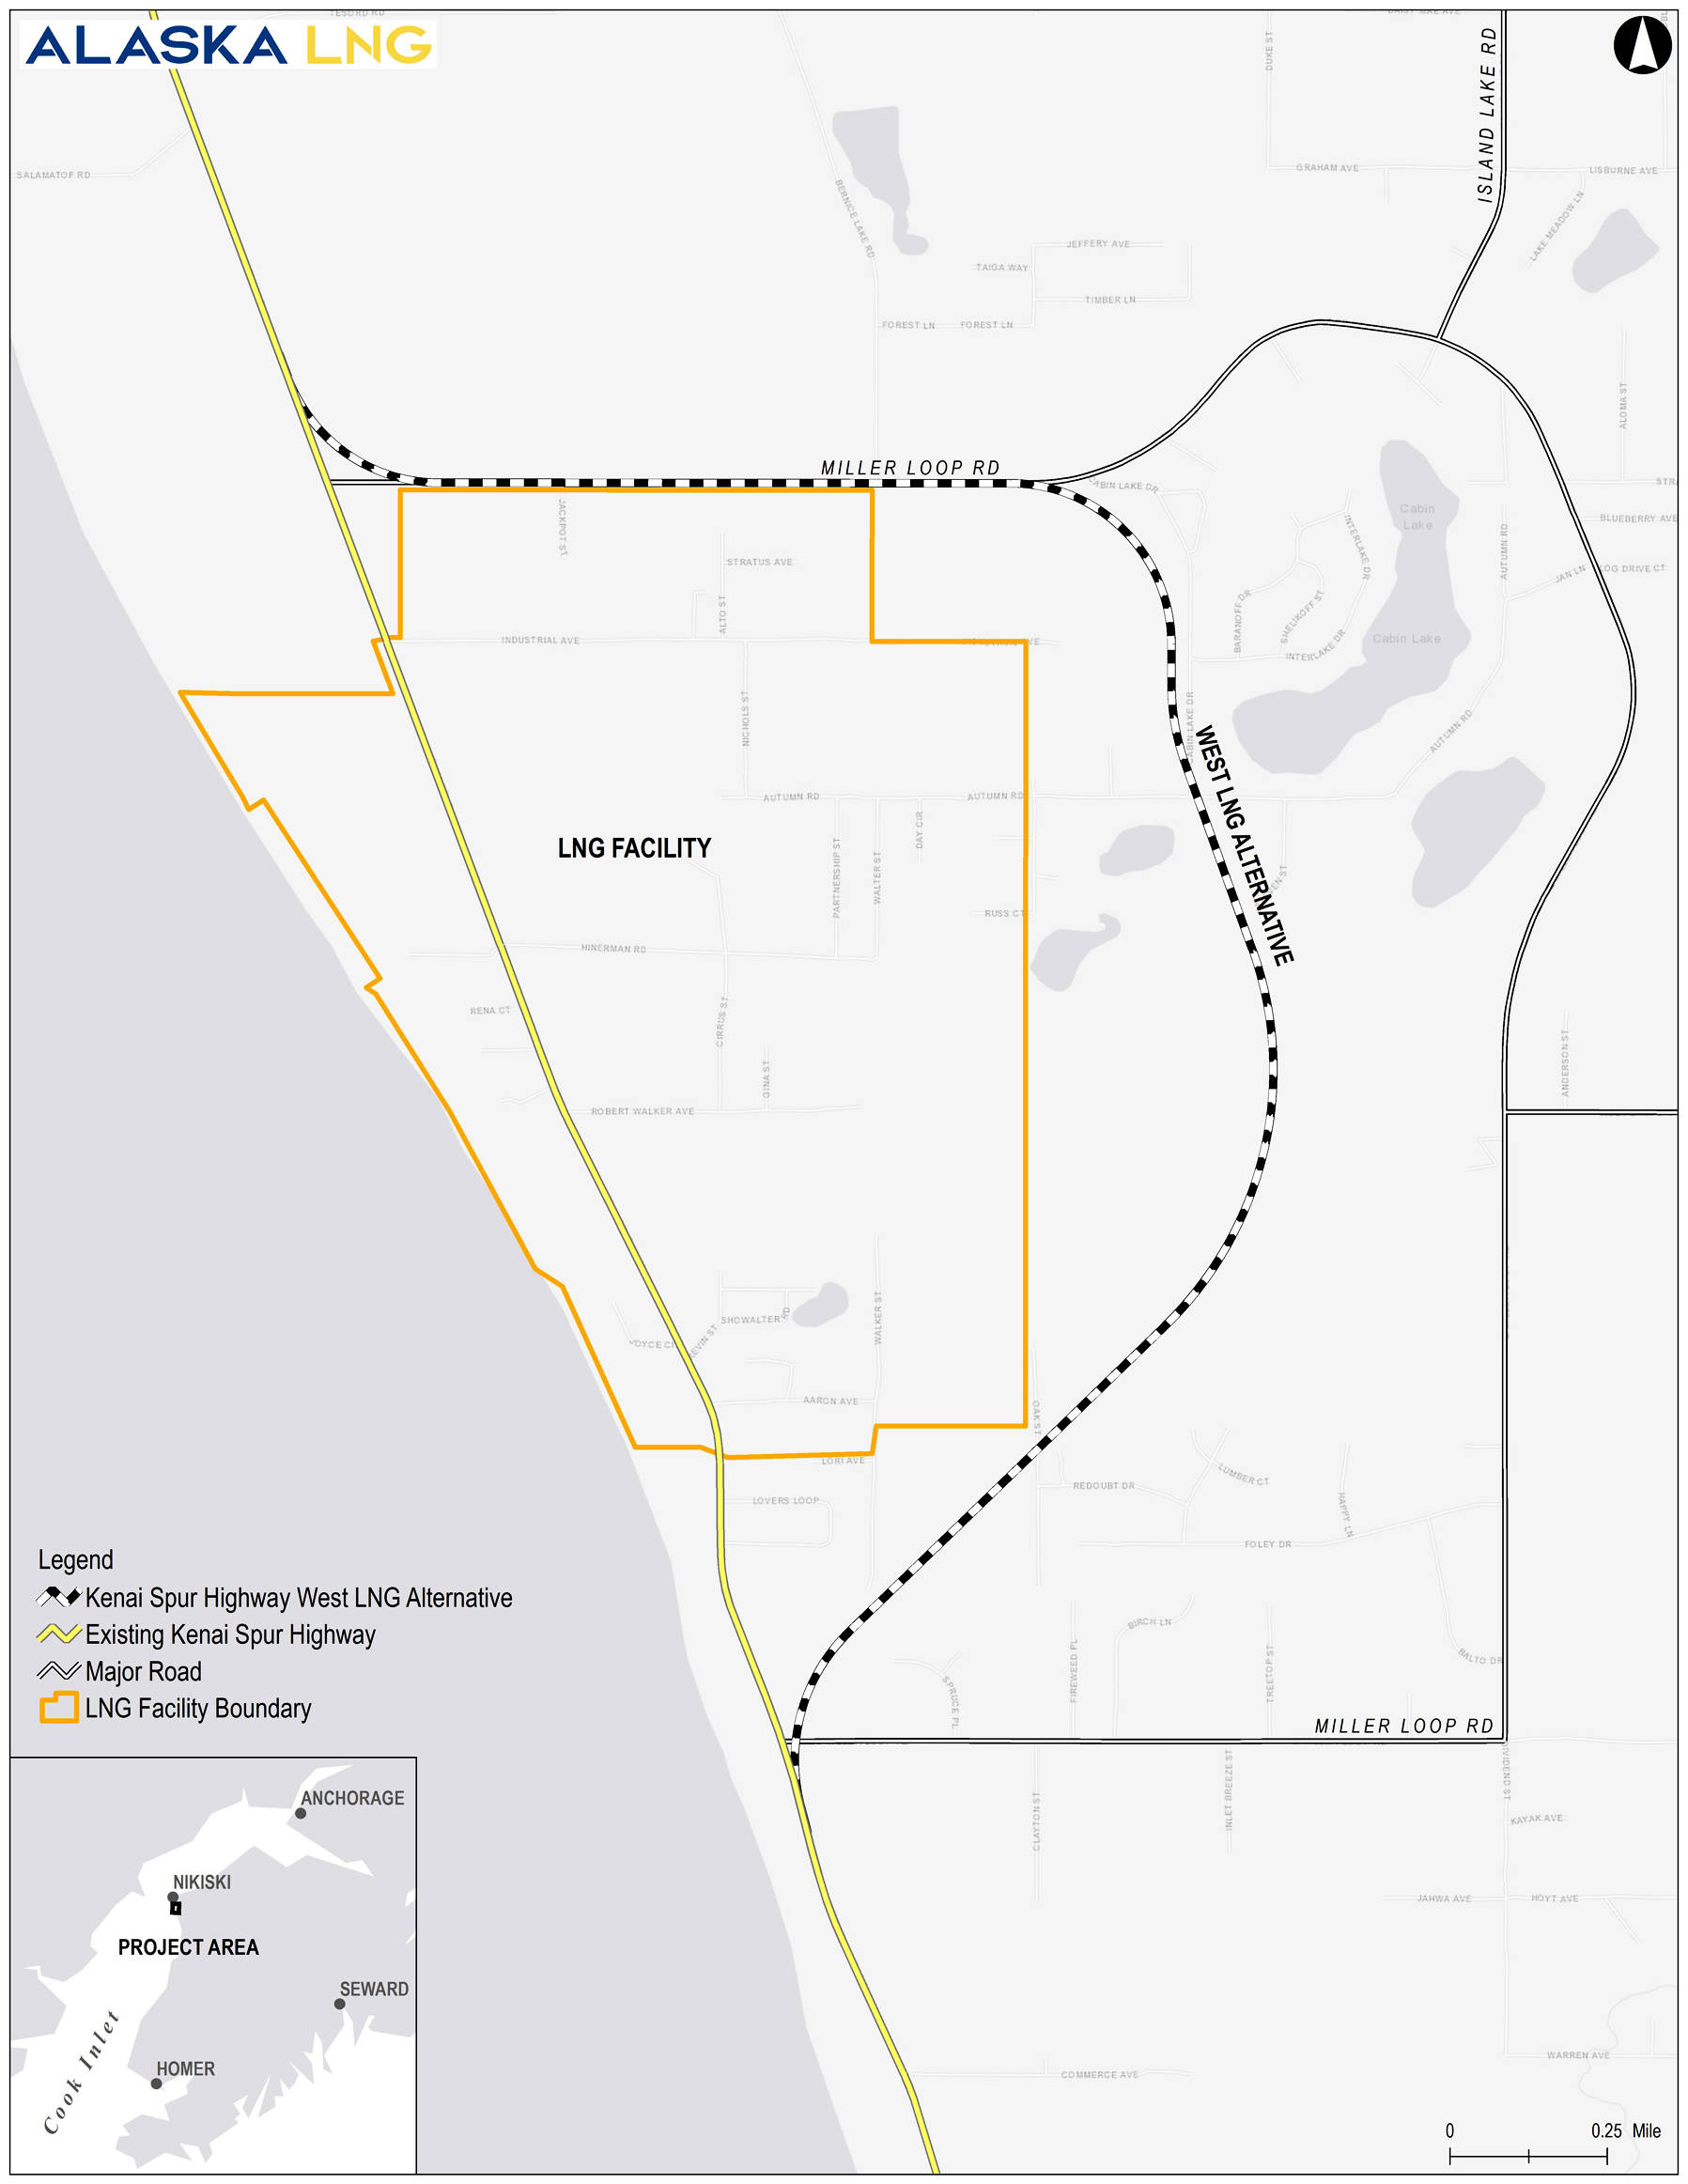 The yellow line on this map shows the existing Kenai Spur Highway between approximately mile 19 and 22, while the striped line shows the Alaska Gasline Development Corporation’s chosen route for moving the highway around its planned natural gas liquifaction facility and export terminal in Nikiski. After considering approximately 26 possible routes since 2015, AGDC announced its choice at a Wednesday public meeting in Nikiski. (Map courtesy of Alaska Gasline Development Corporation).